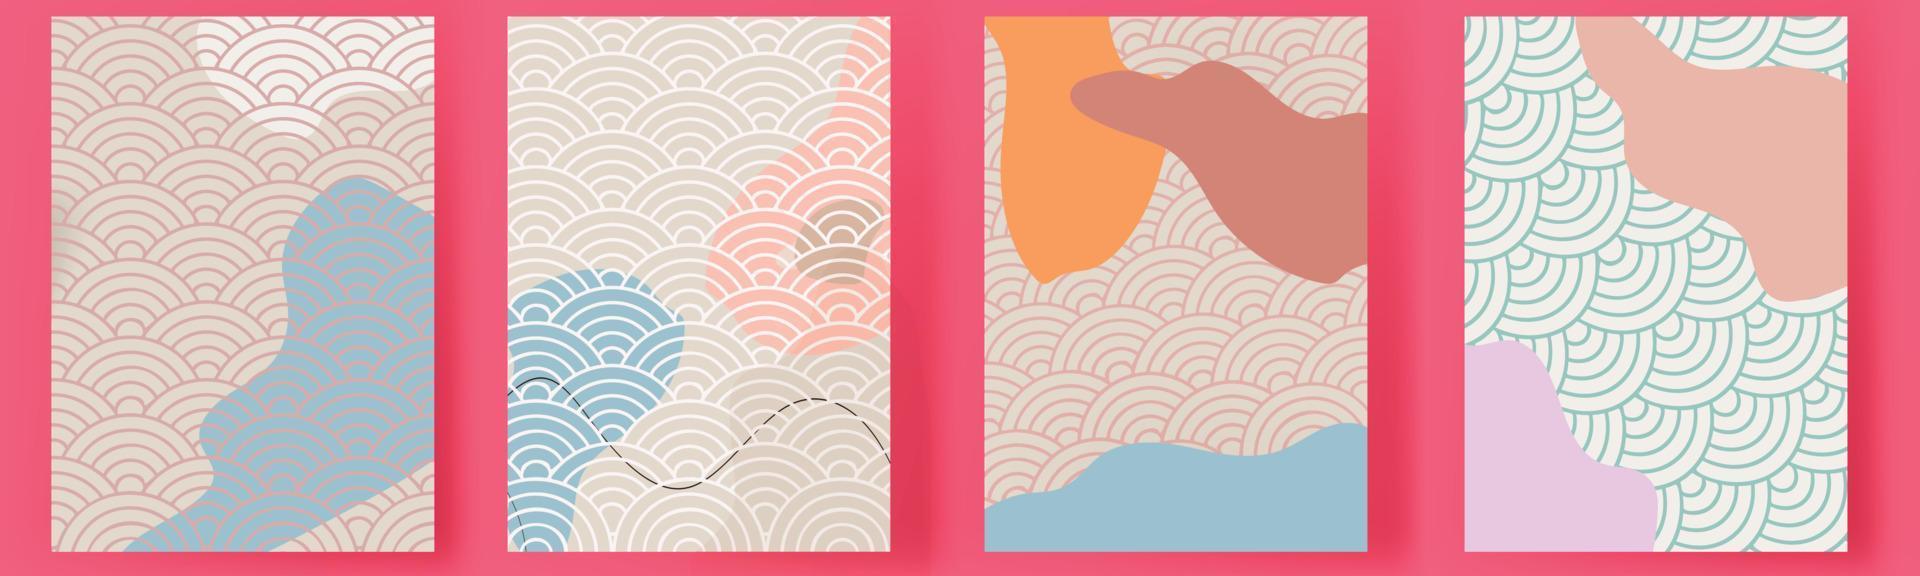 Japanese template modern minimal art vector set. Geometric card background set.abstract cover design banner brochure style.